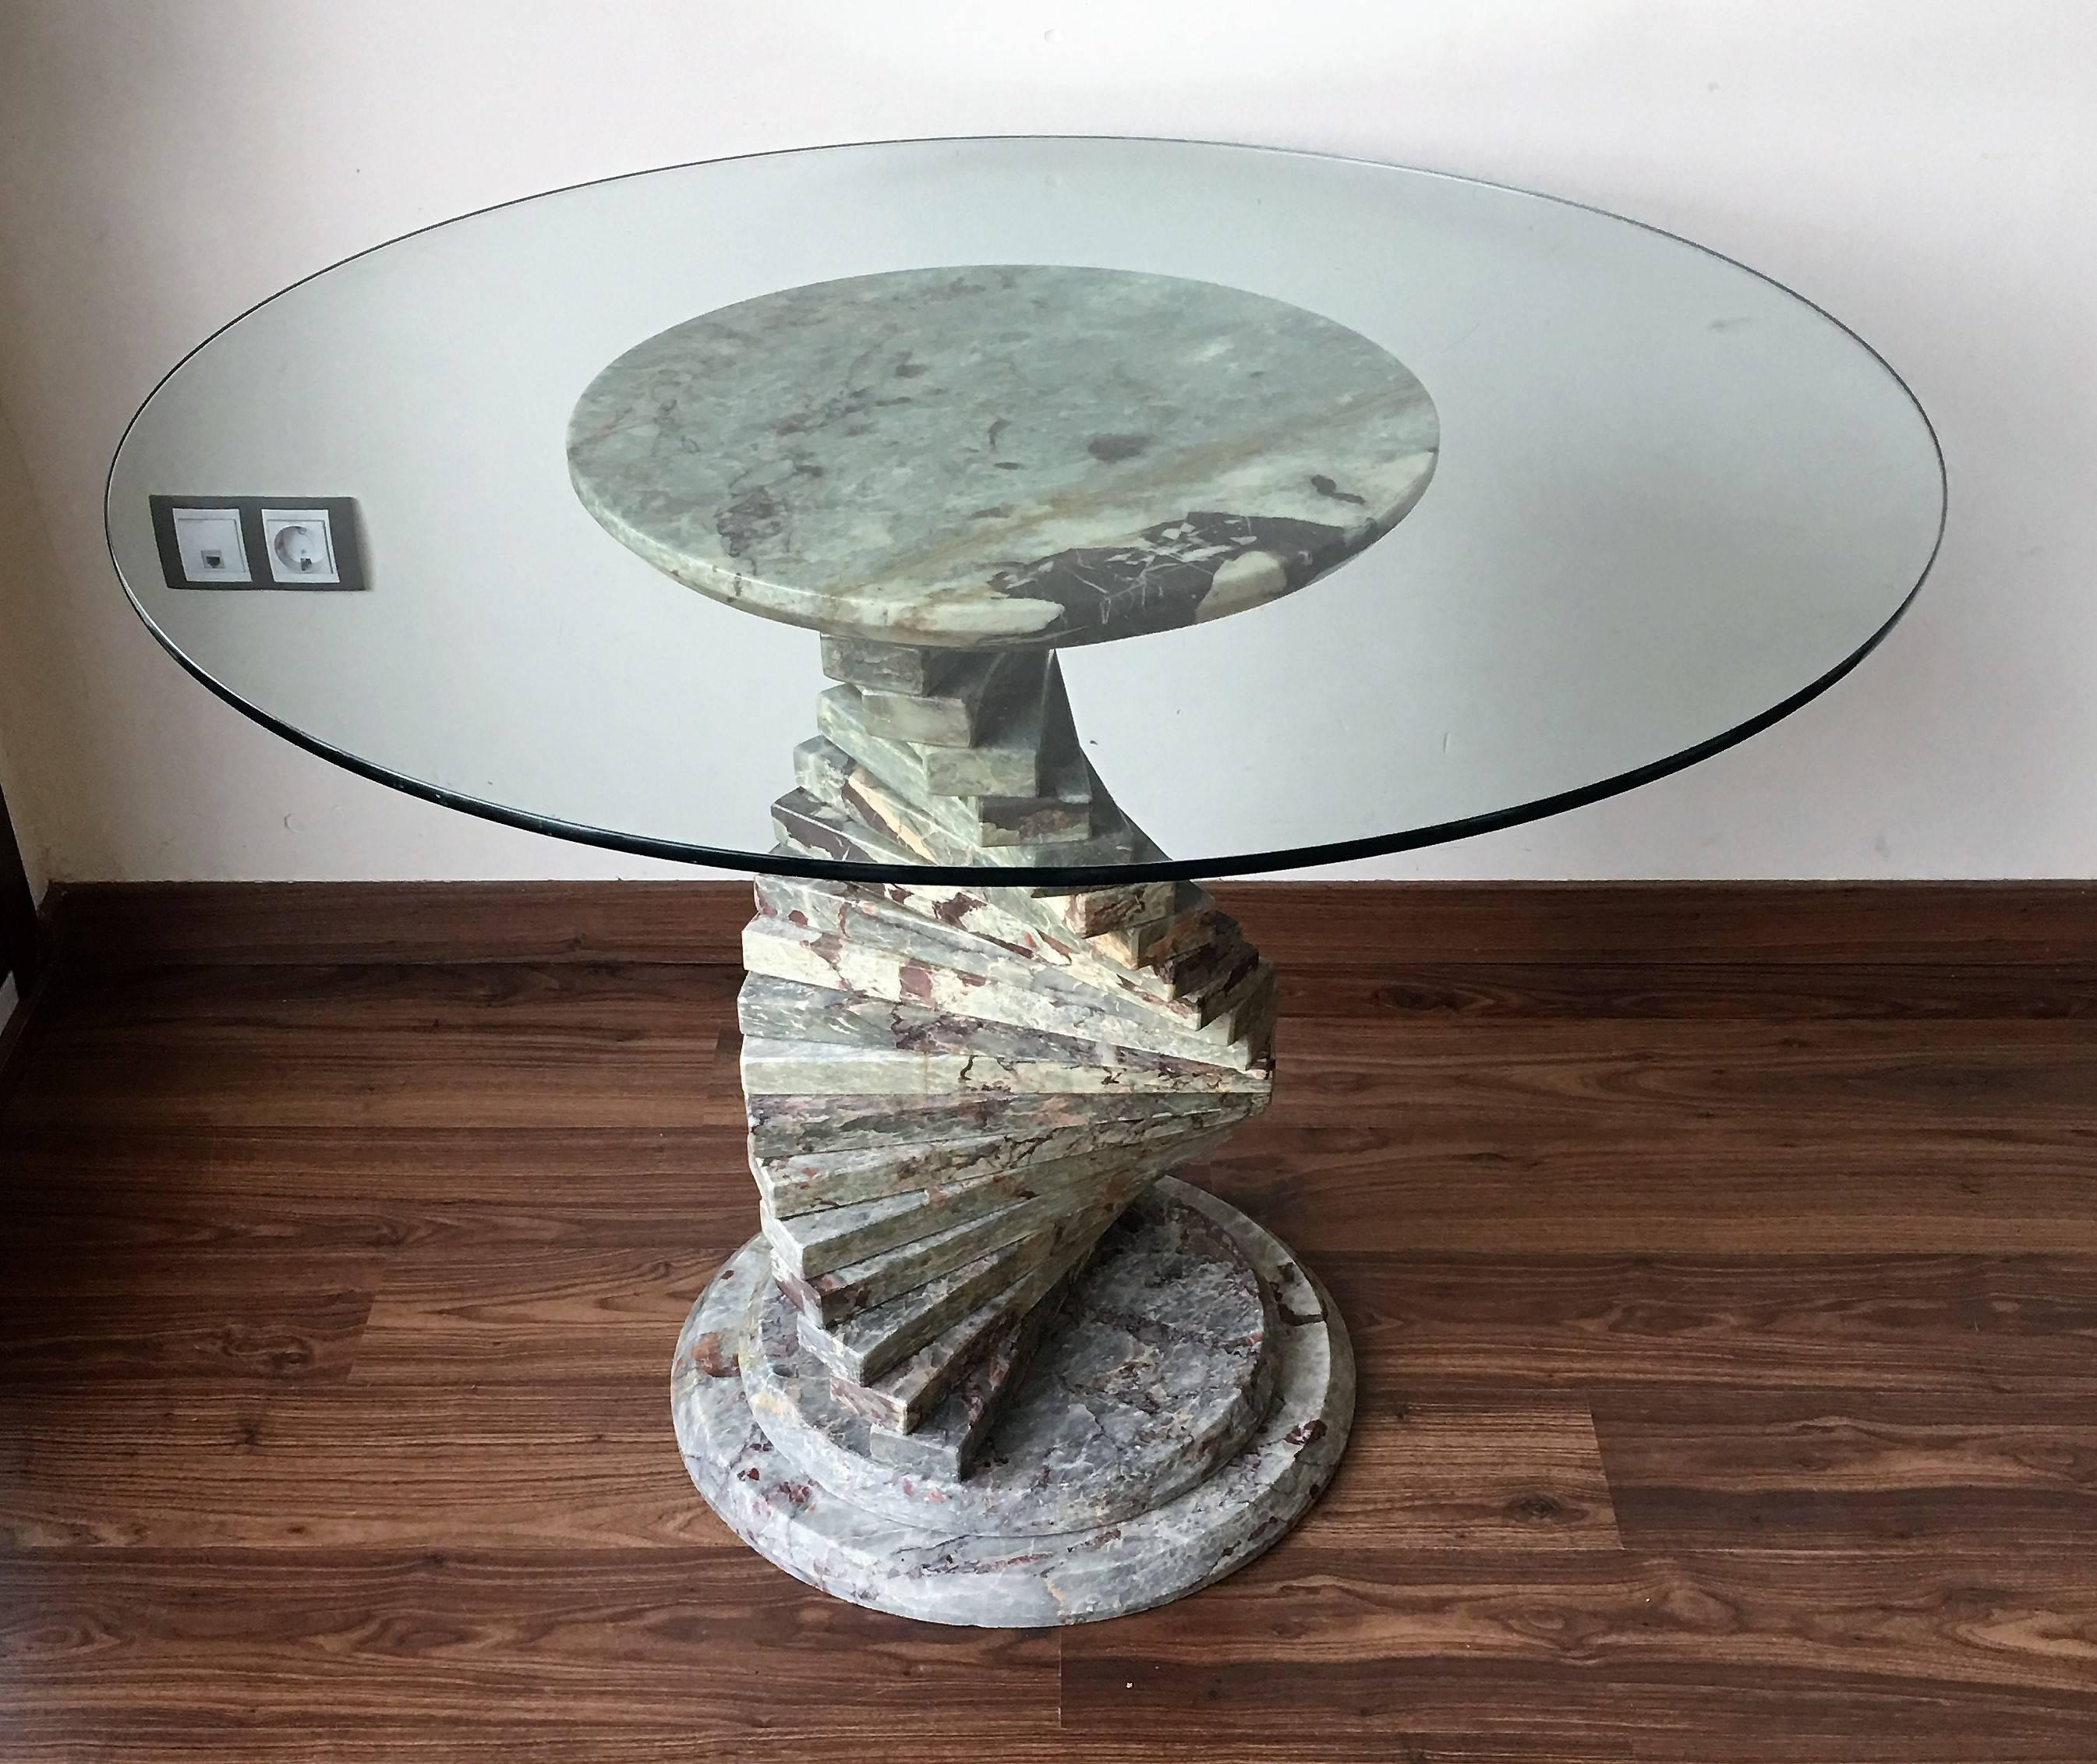 Art Deco pedestal marble dining or coffee table with round glass top

Measurements of each piece: 13.75in x 1.25in
Floor base measurements diameter 19.25in.